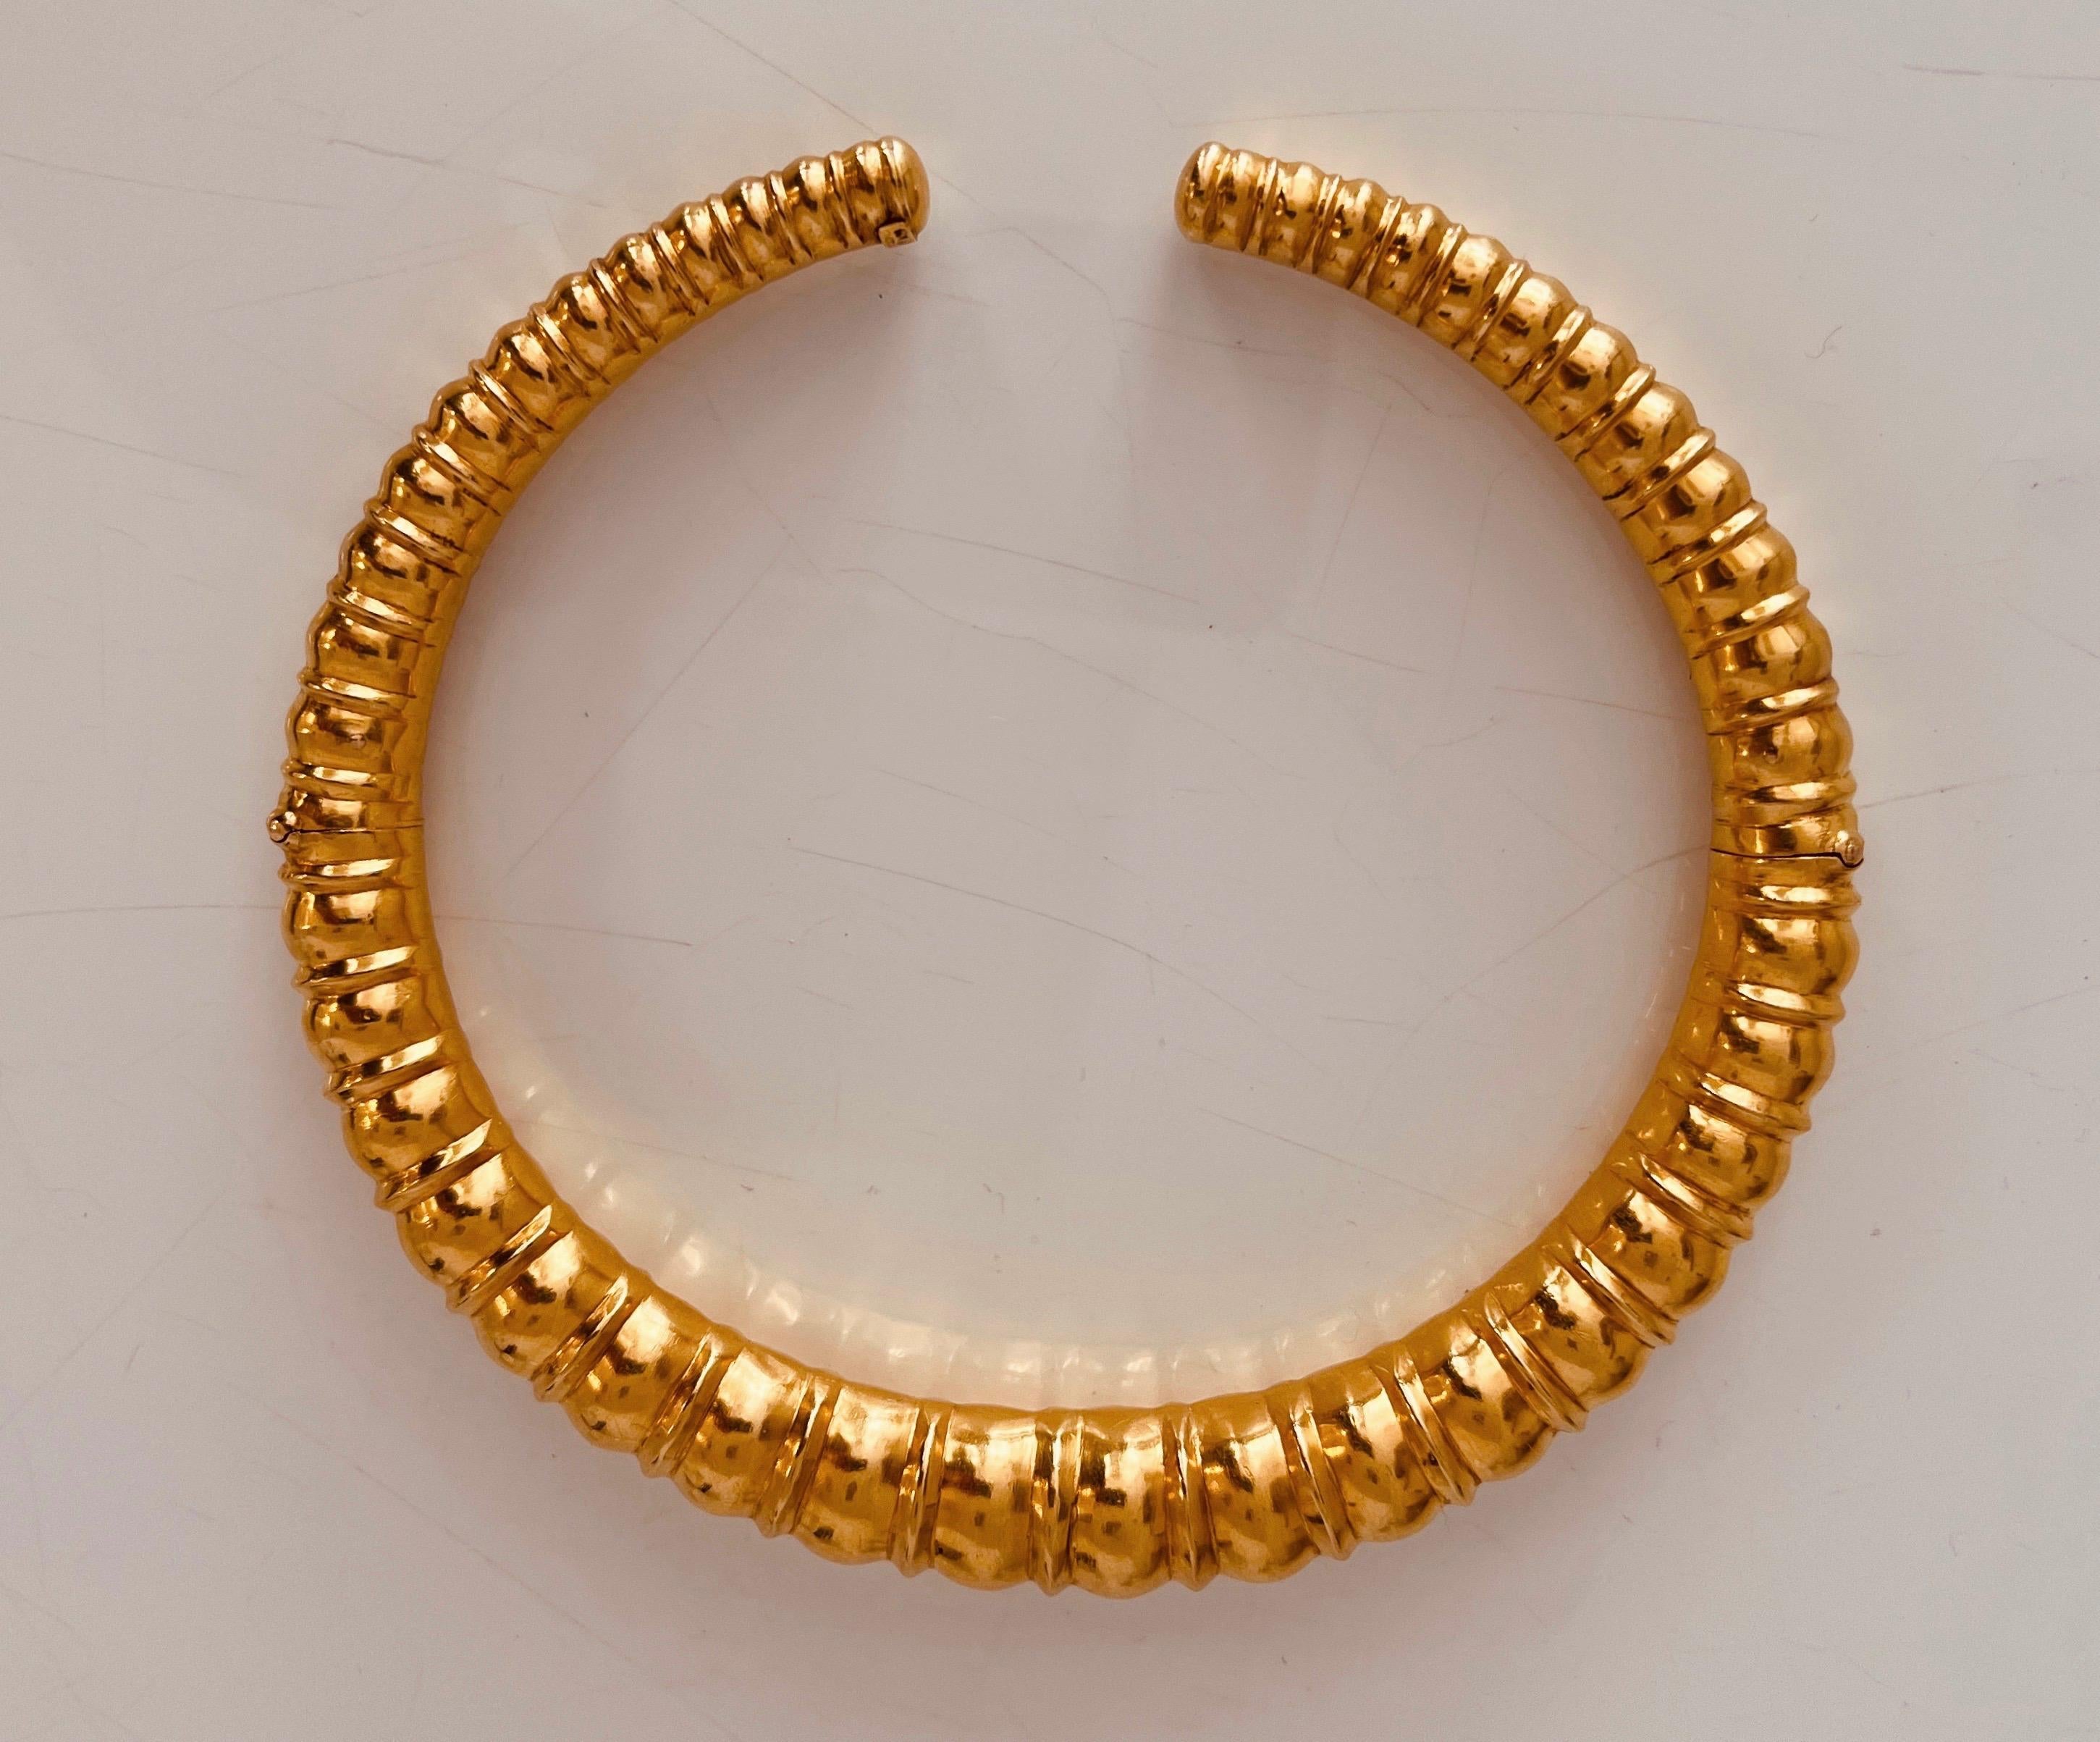 LALAOUNIS 22 Carat Gold Torque Of Graduated Rounded Rib Design. Circa 1970's For Sale 2